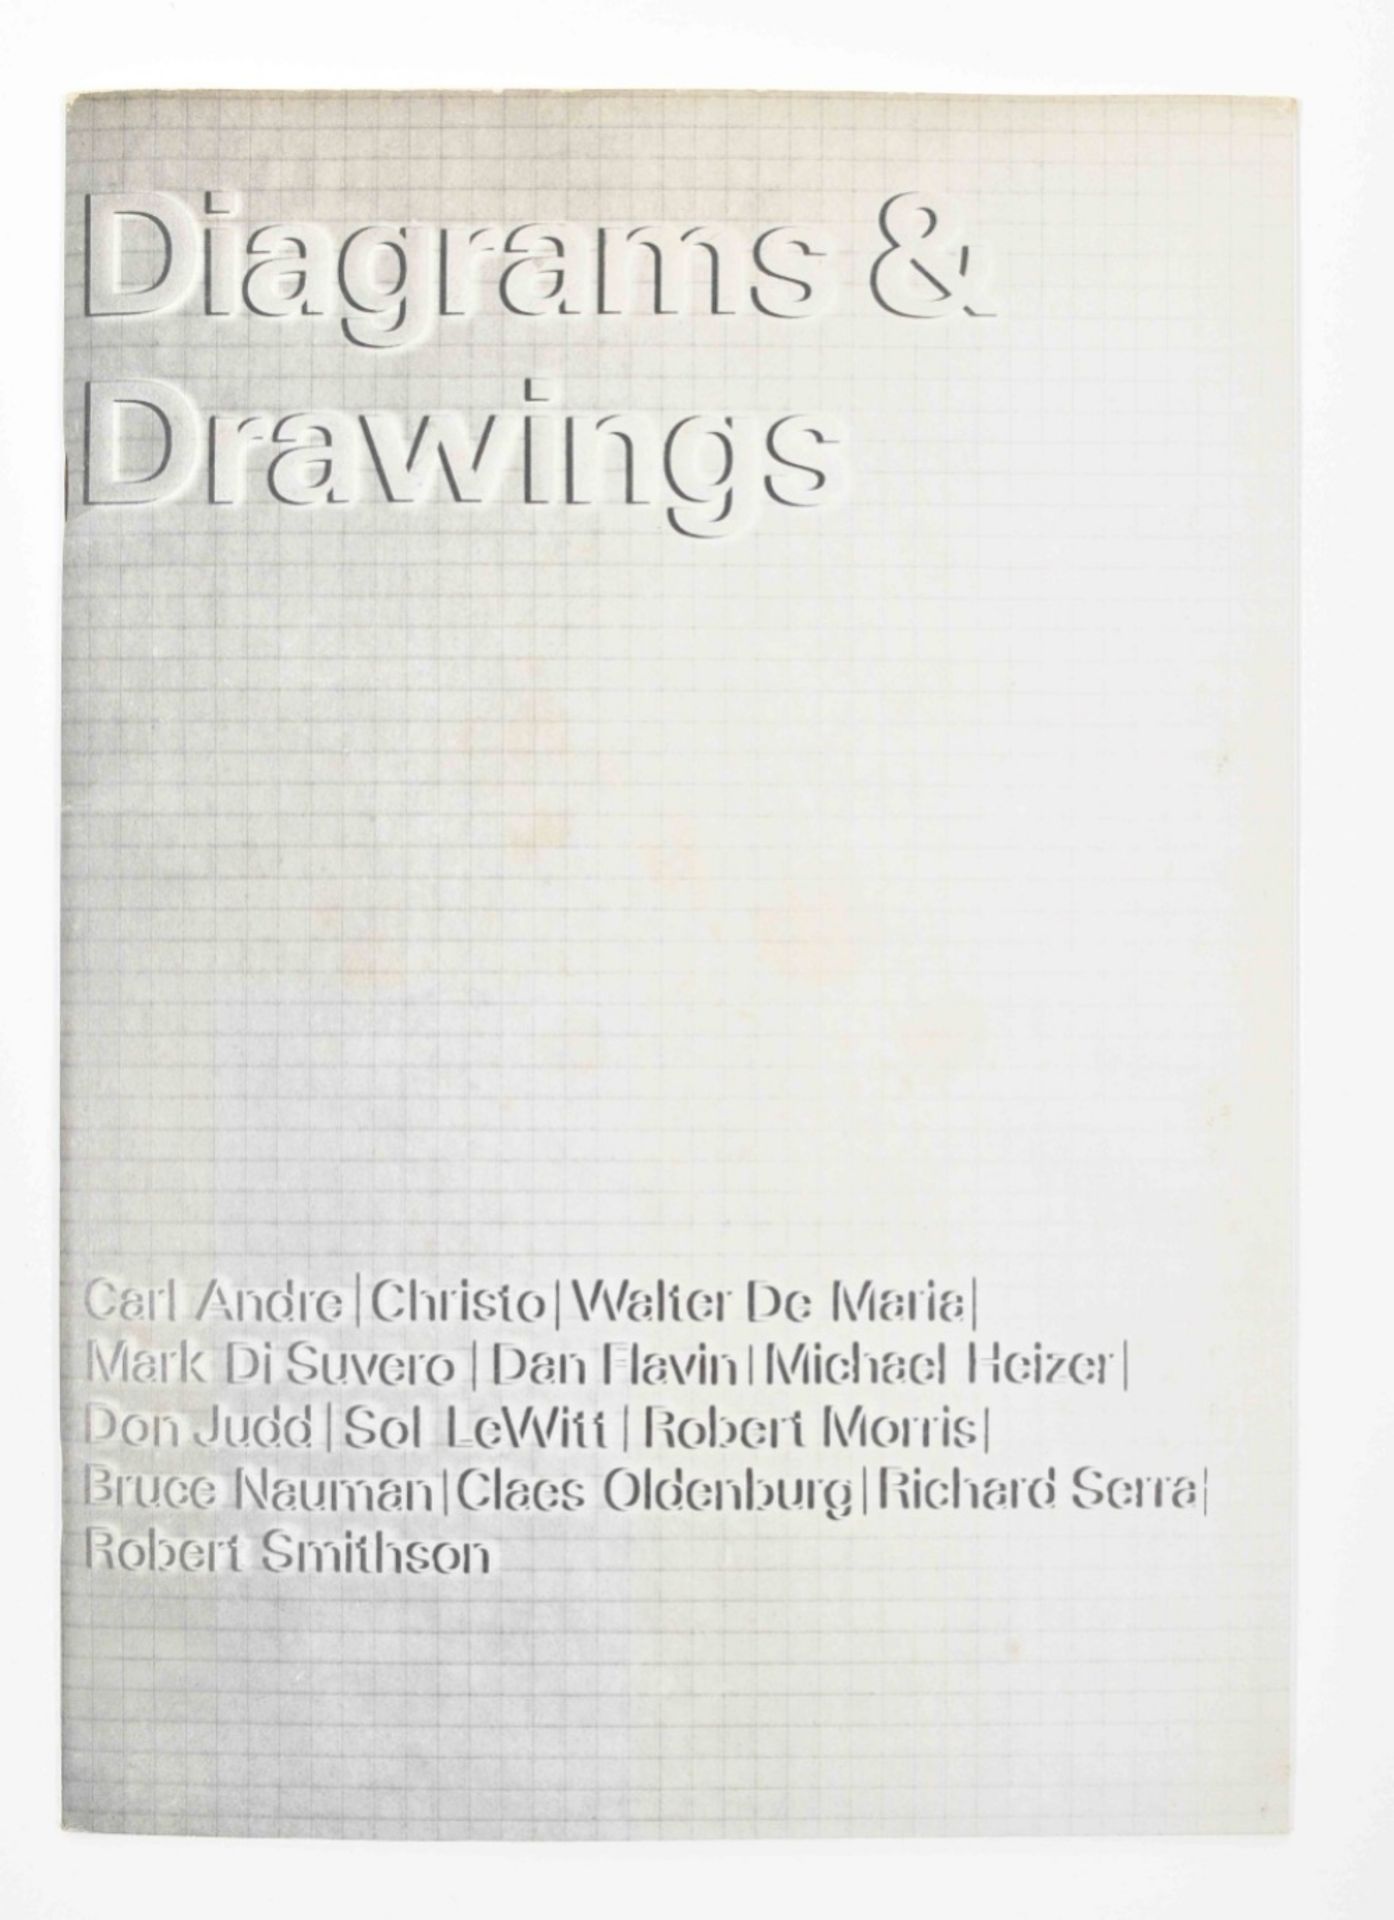 Op Losse Schroeven (1969) and Diagrams and Drawings (1972) - Bild 7 aus 7